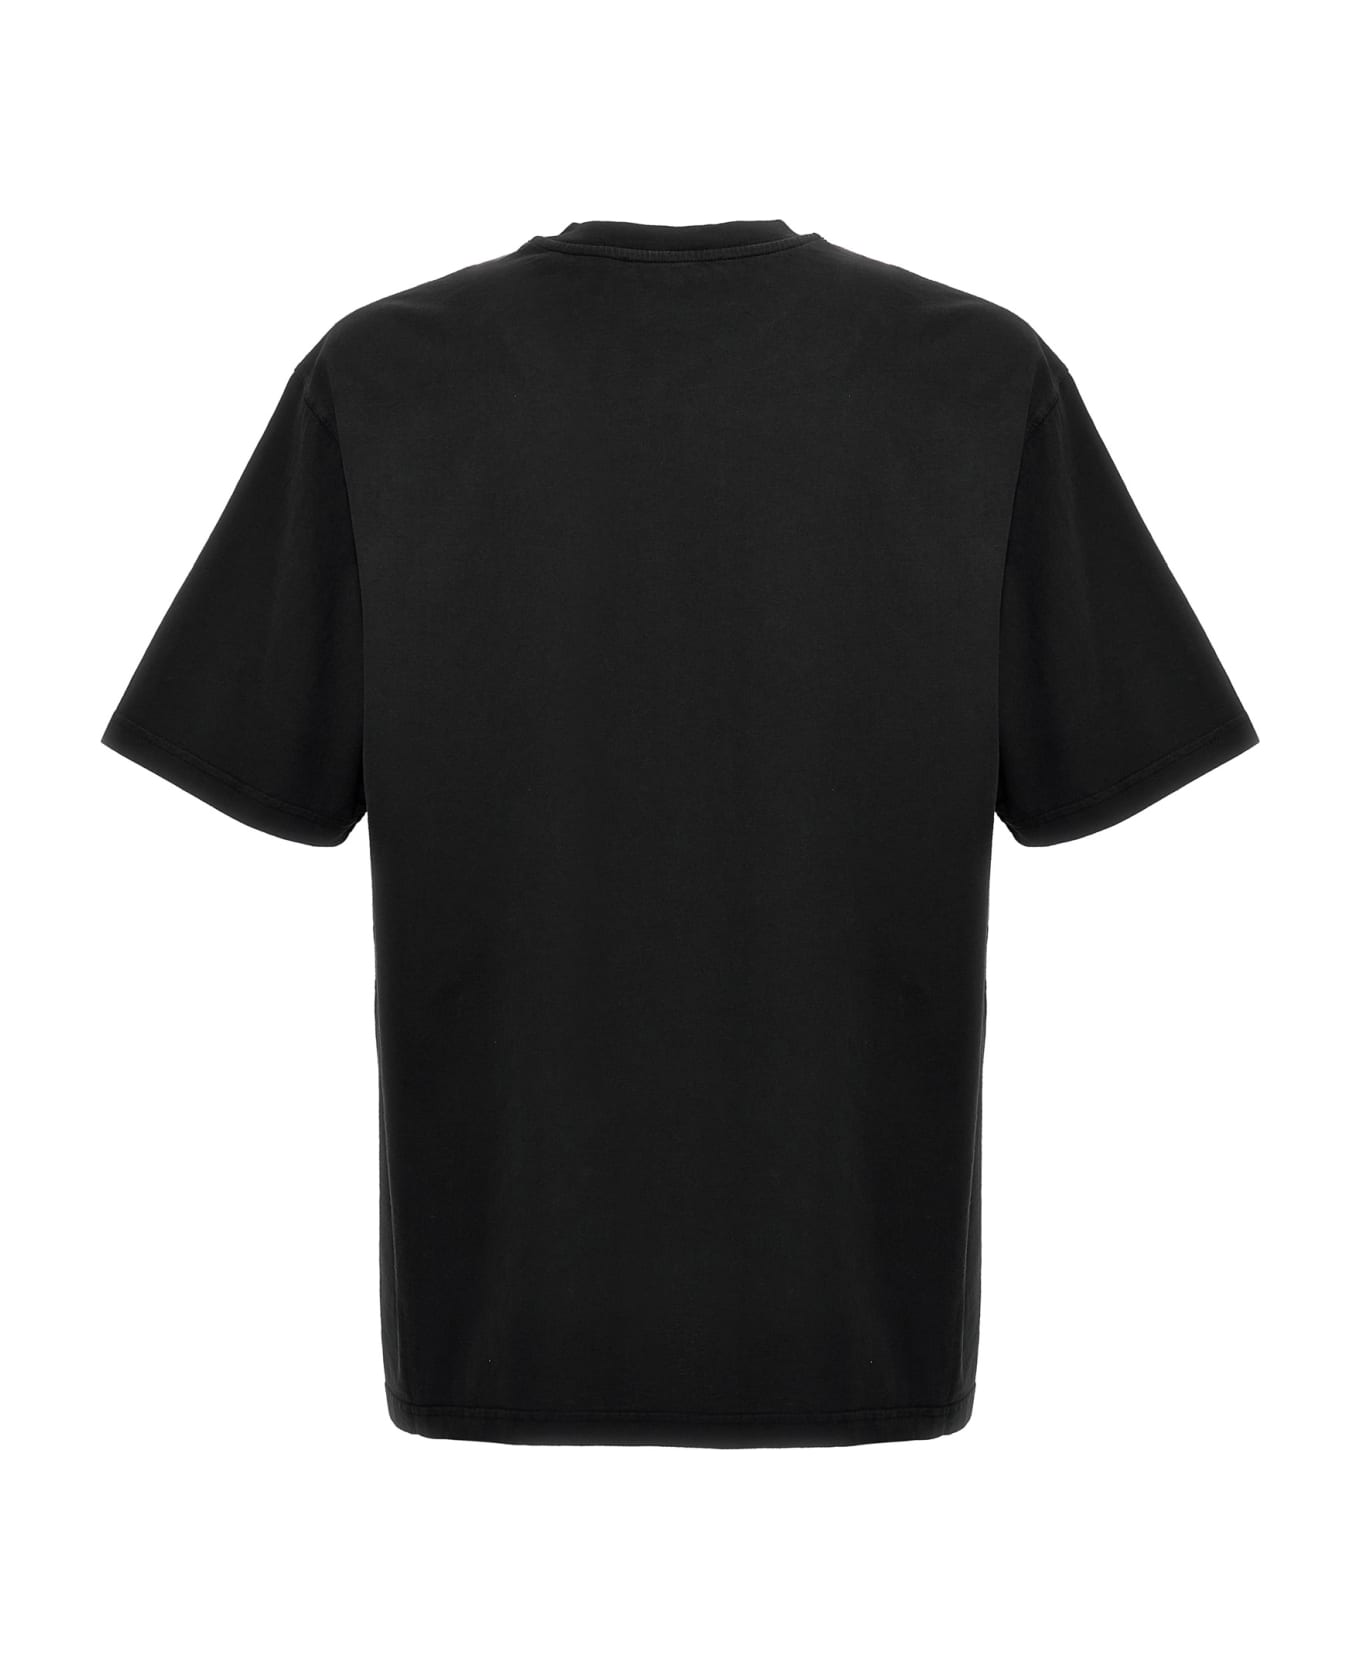 A-COLD-WALL 'essential' T-shirt - BLACK シャツ